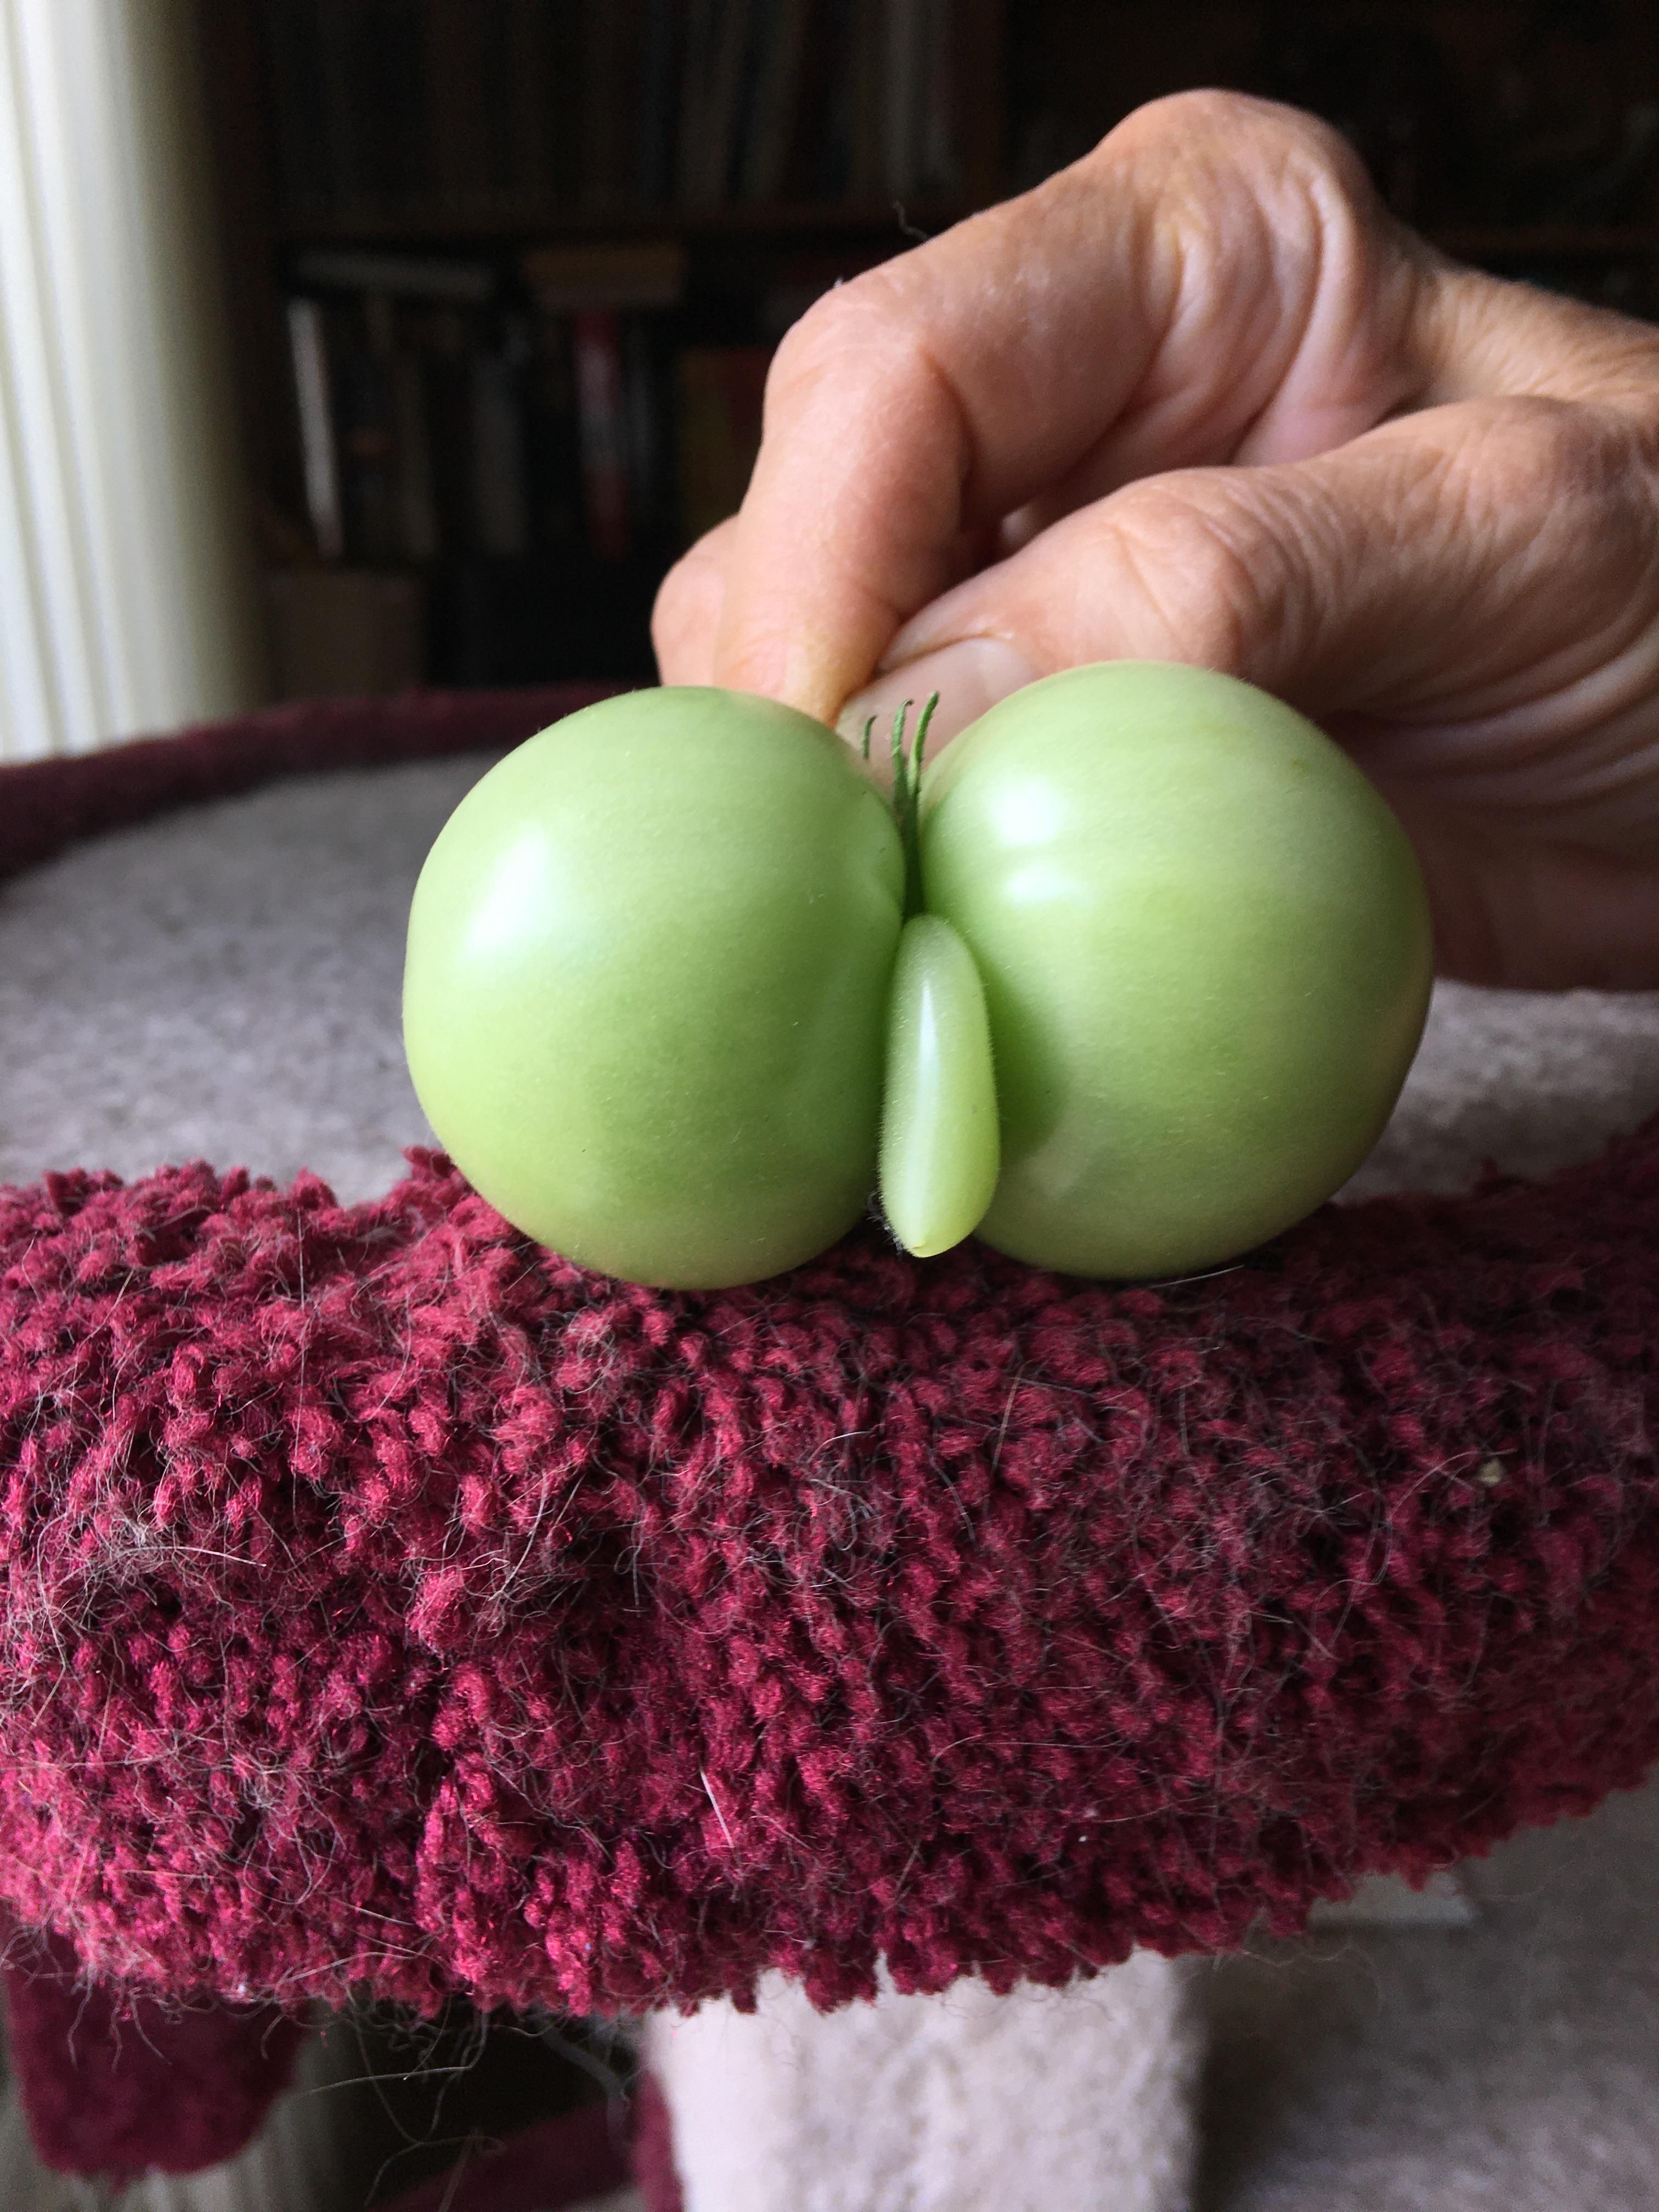 My mom found a naughty tomato in her harvest and asked me not to put it on social media... so here’s the naughty tomato...